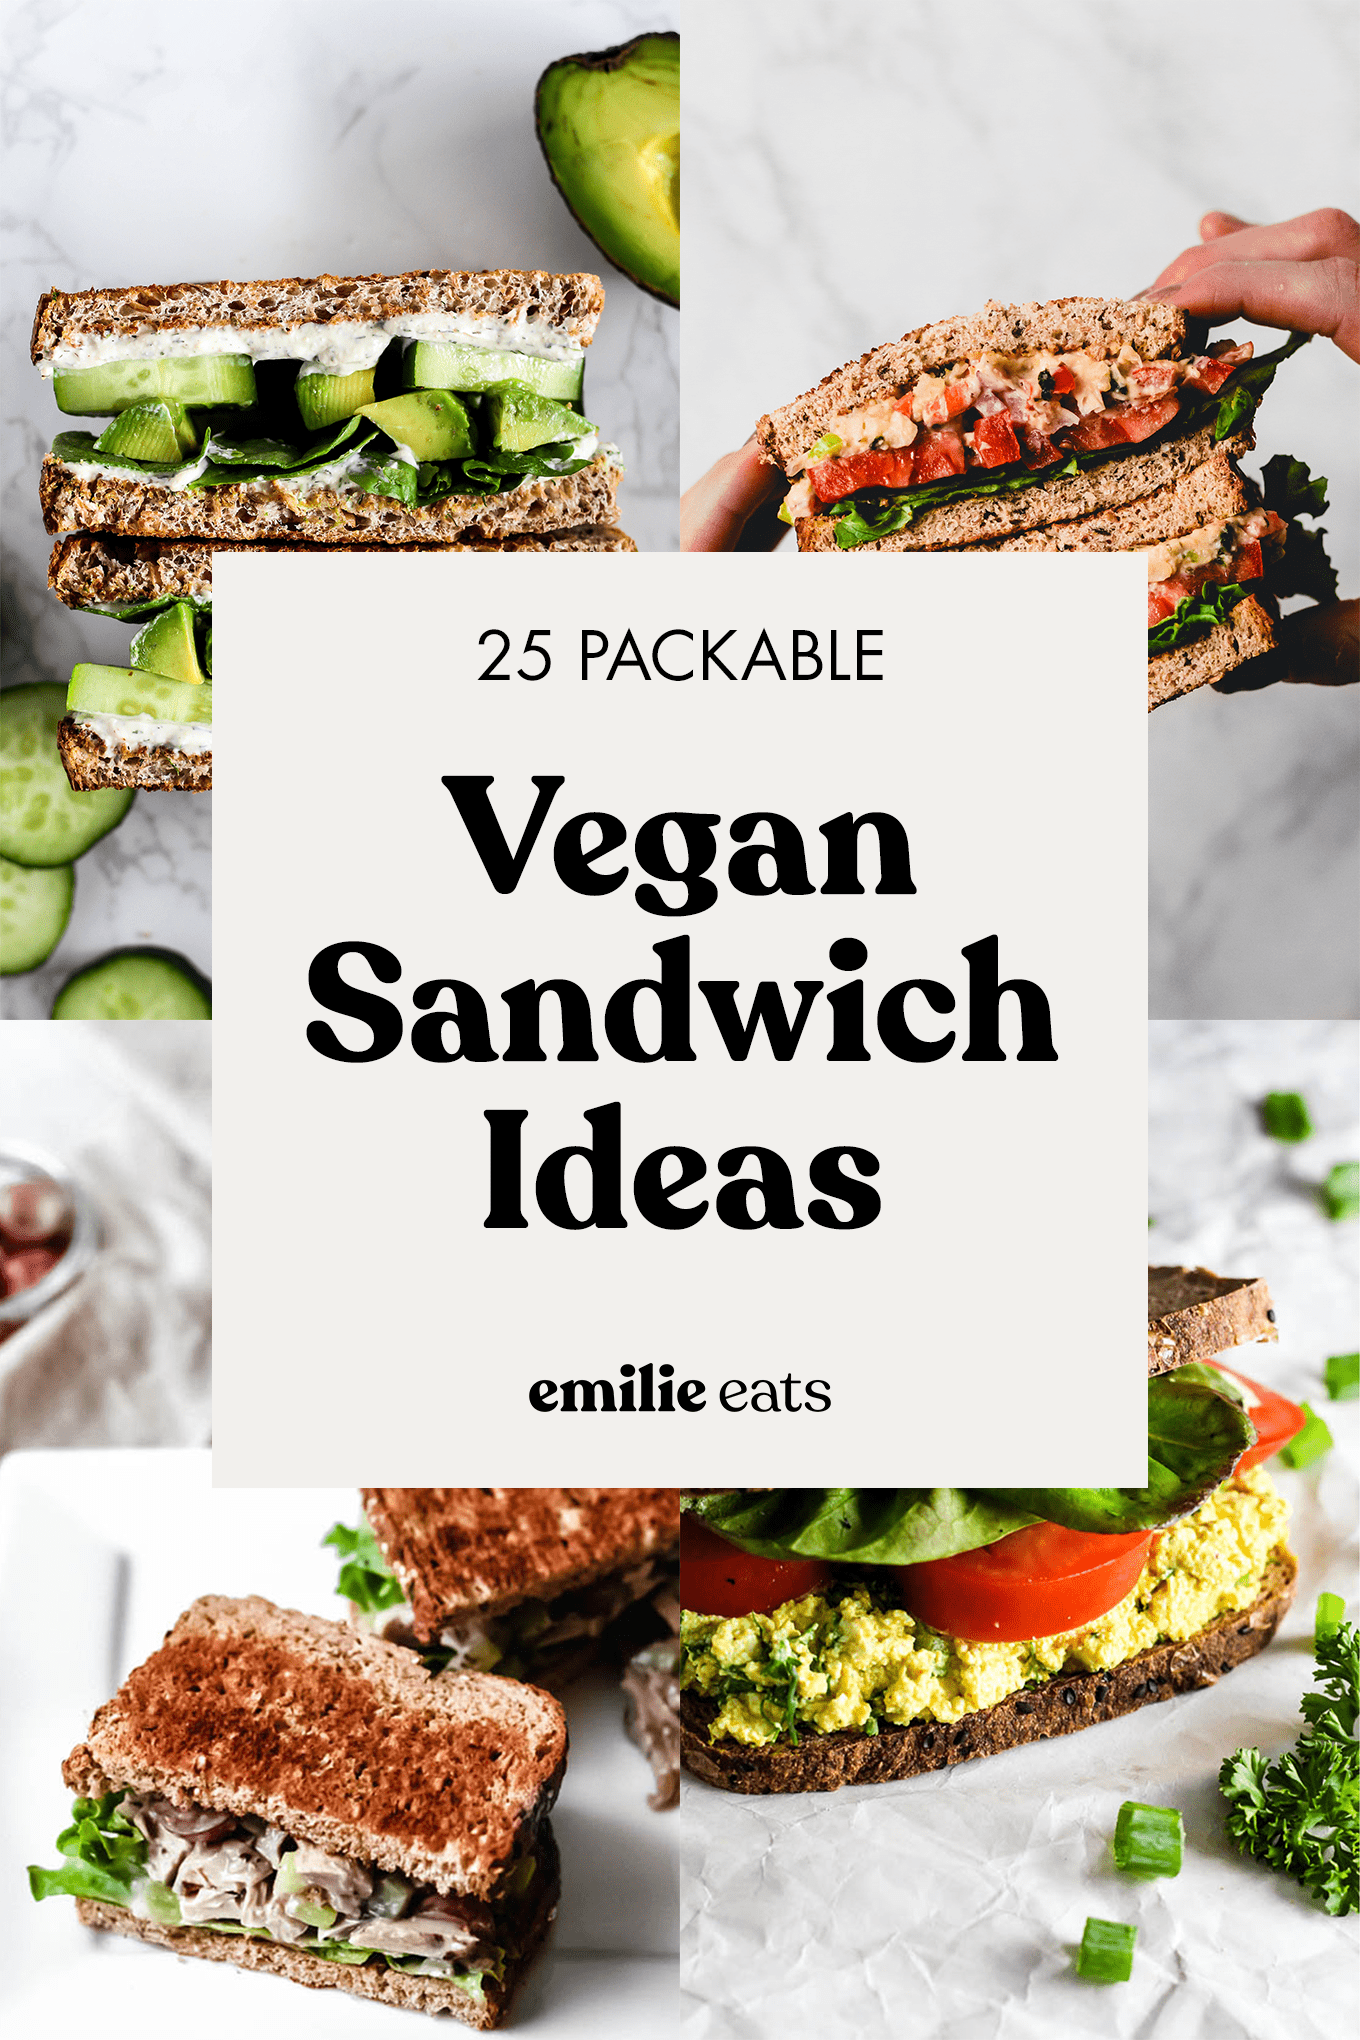 https://www.emilieeats.com/wp-content/uploads/2017/08/vegan-sandwiches-to-pack-for-work-or-school-hero.png